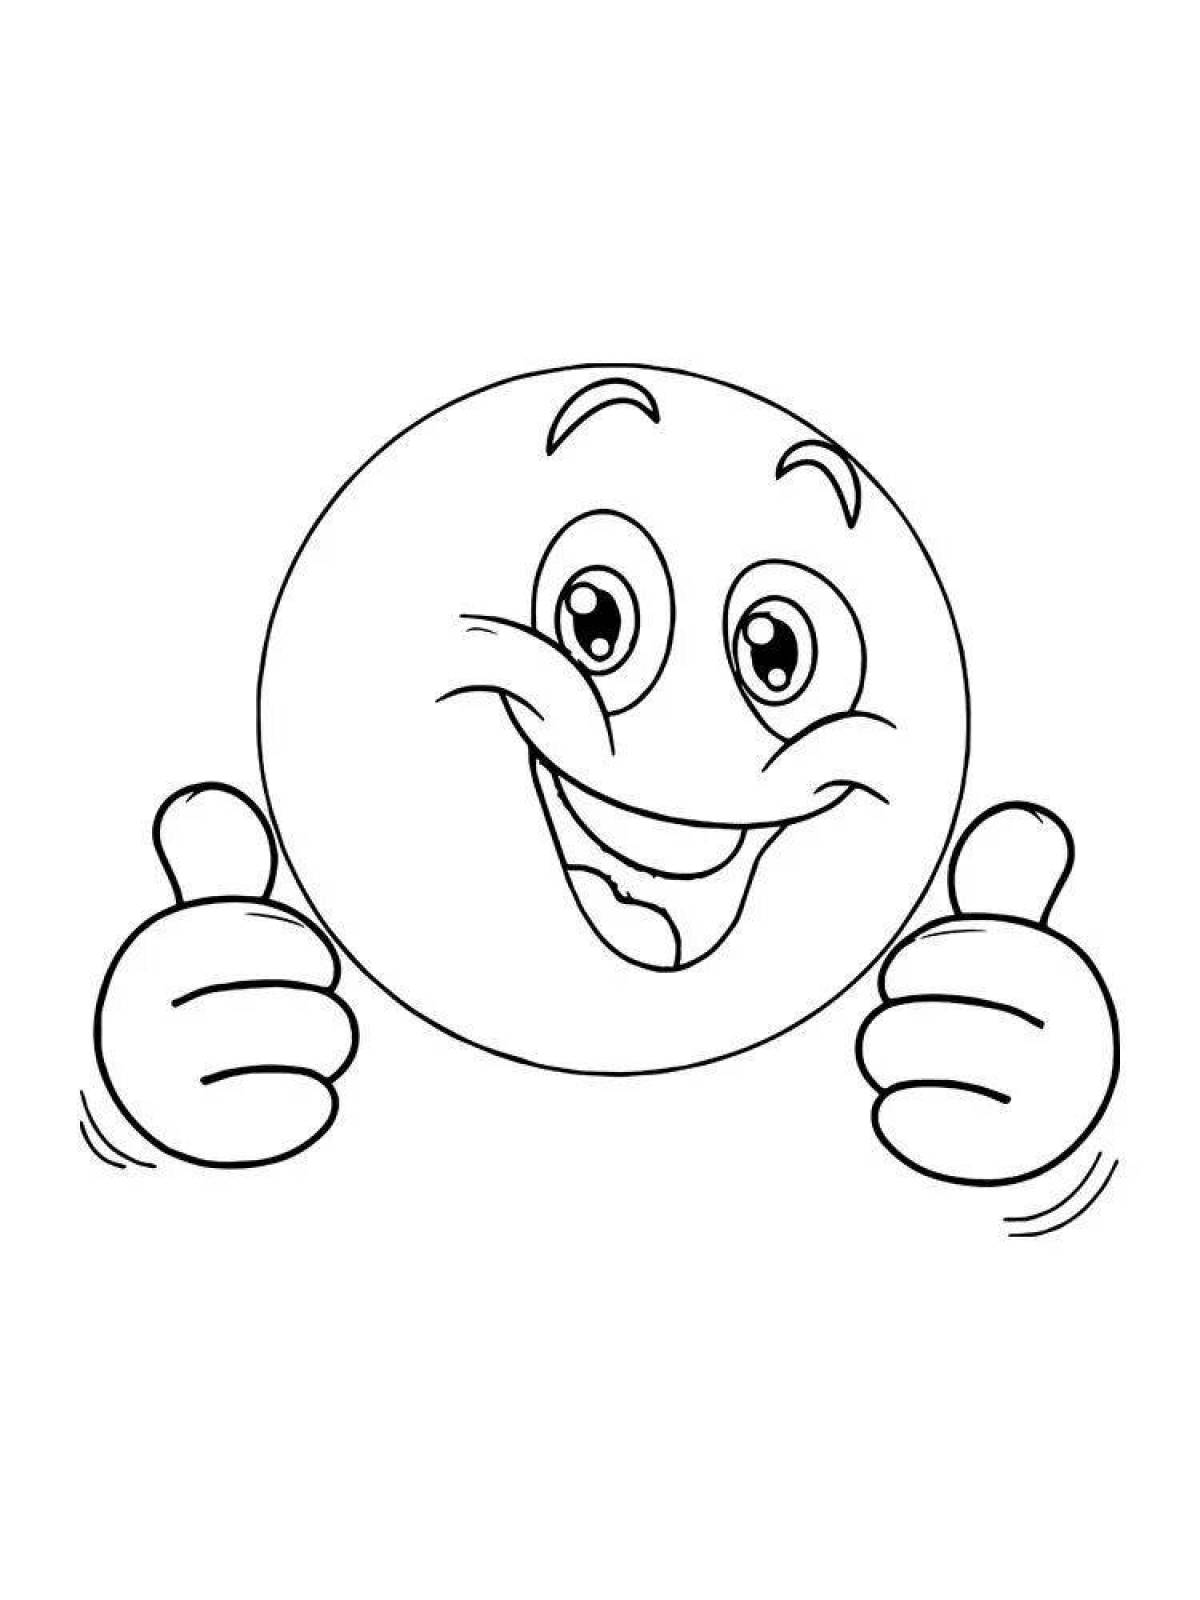 Animated emoji coloring page for kids